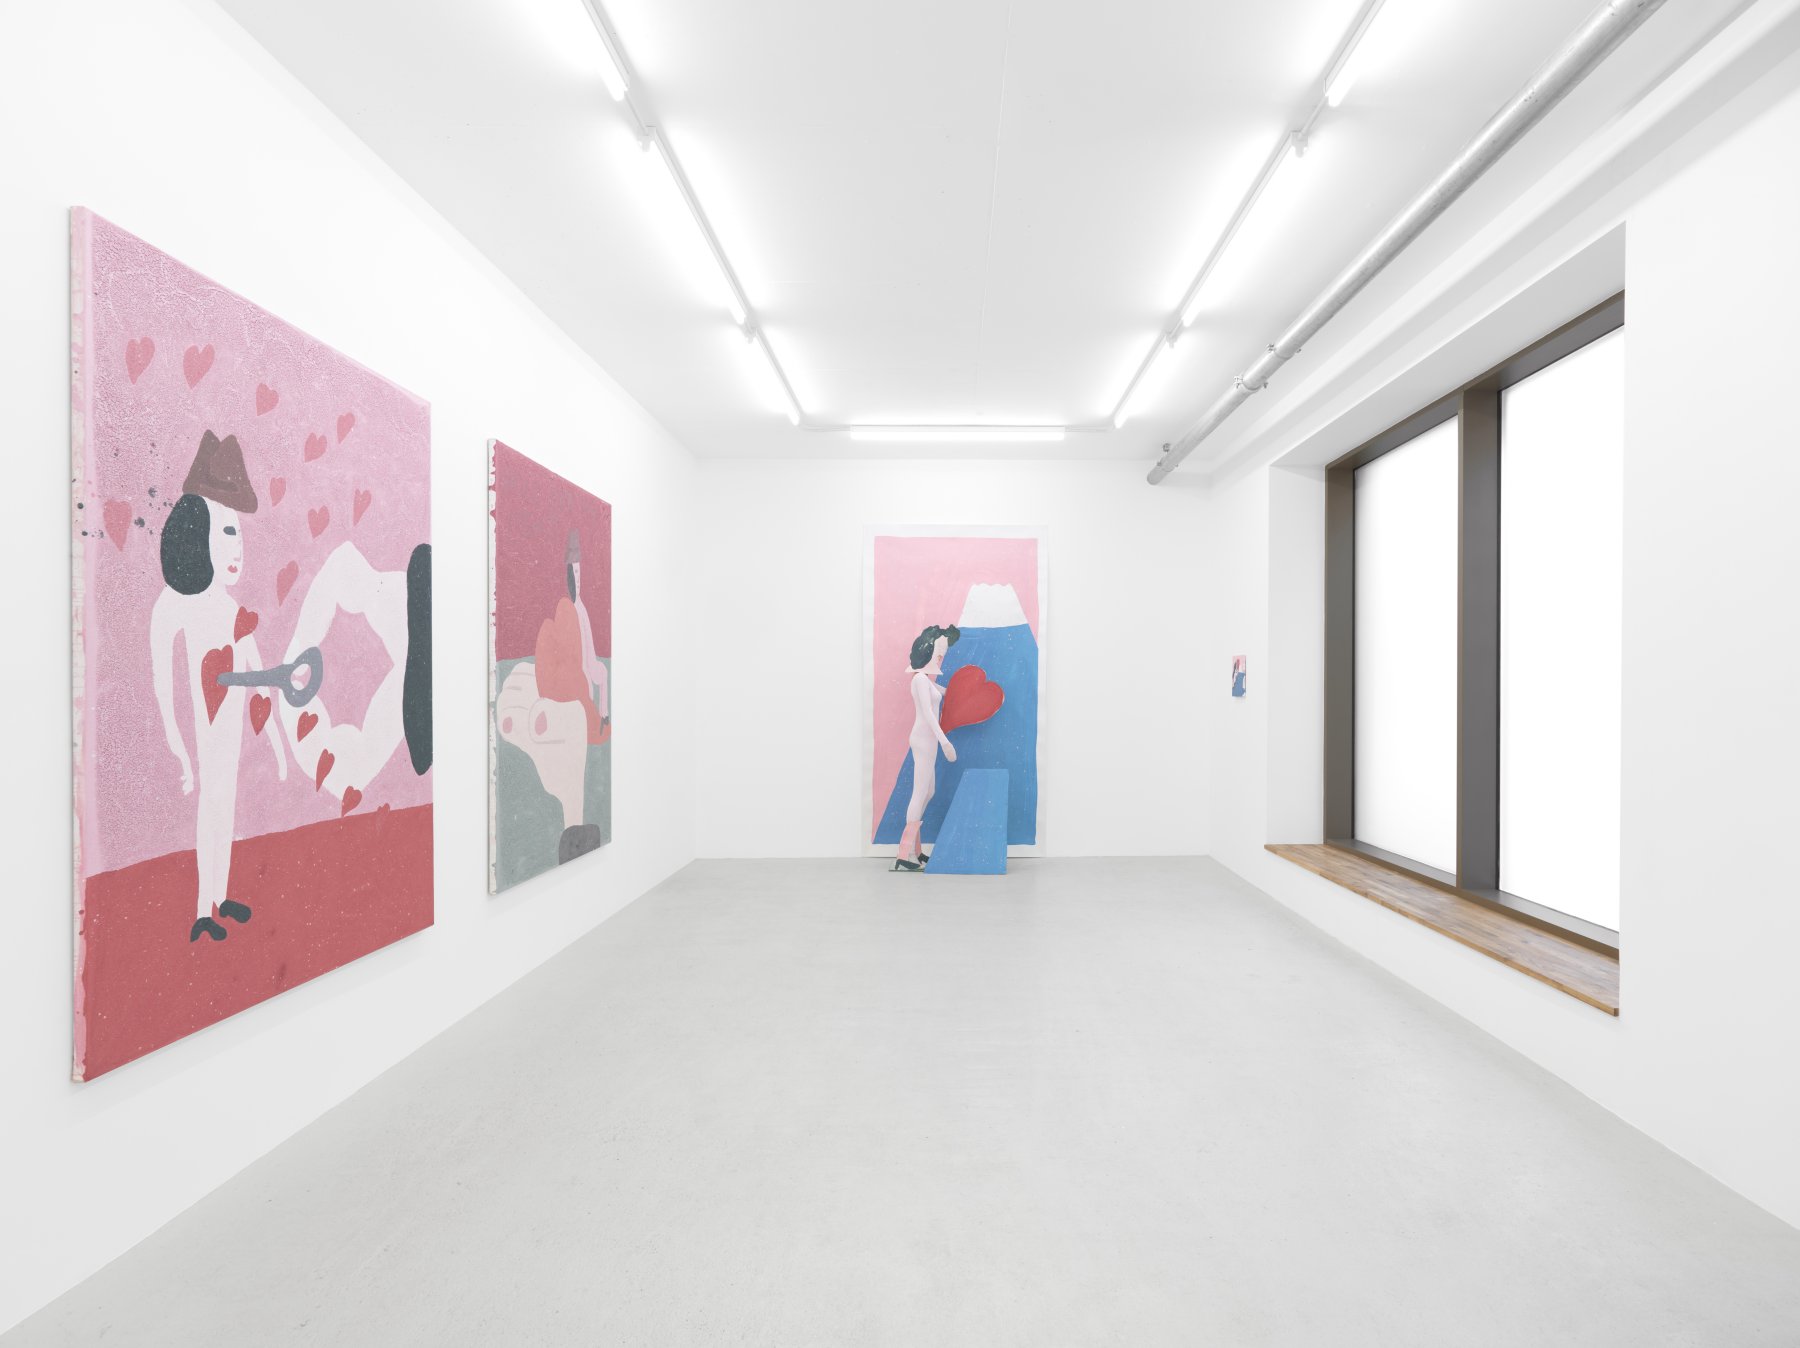 Installation image for Kate Groobey: Always Love, at Sim Smith